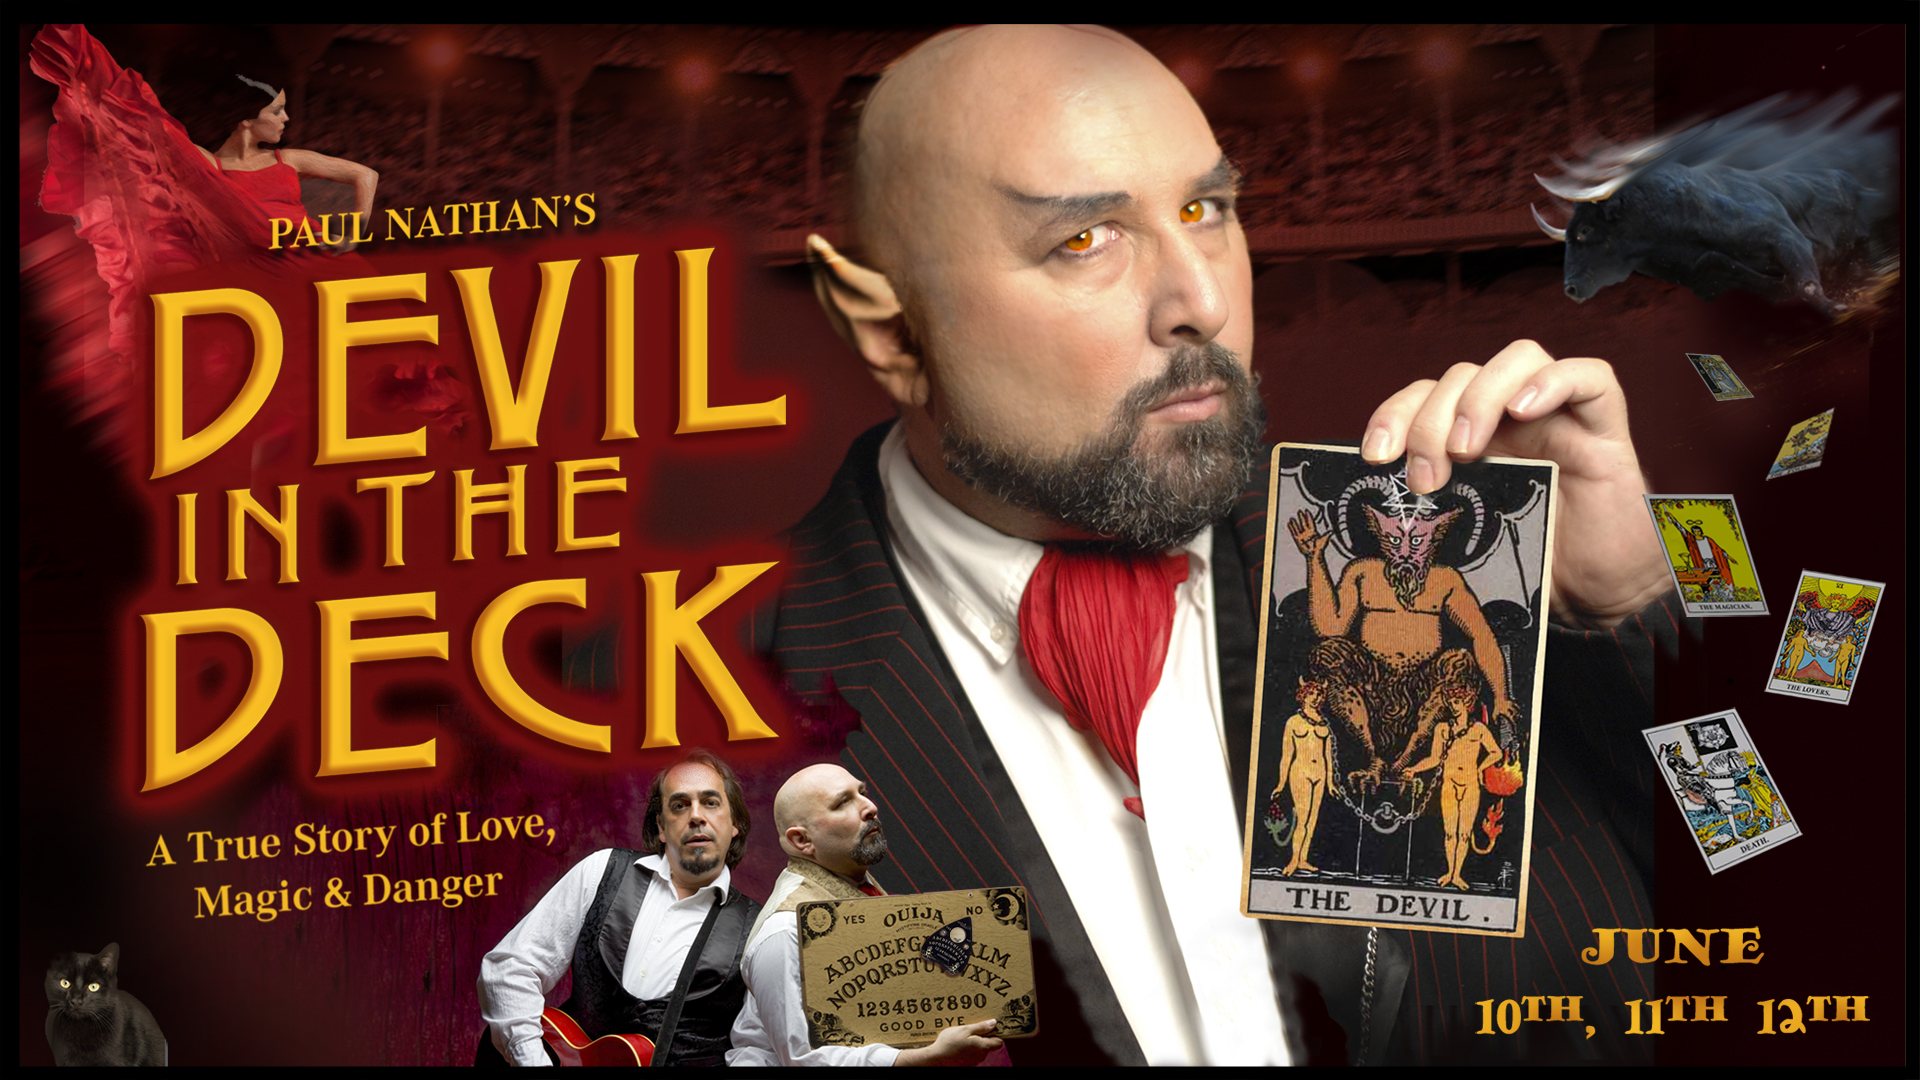 Devil in the Deck Show Poster